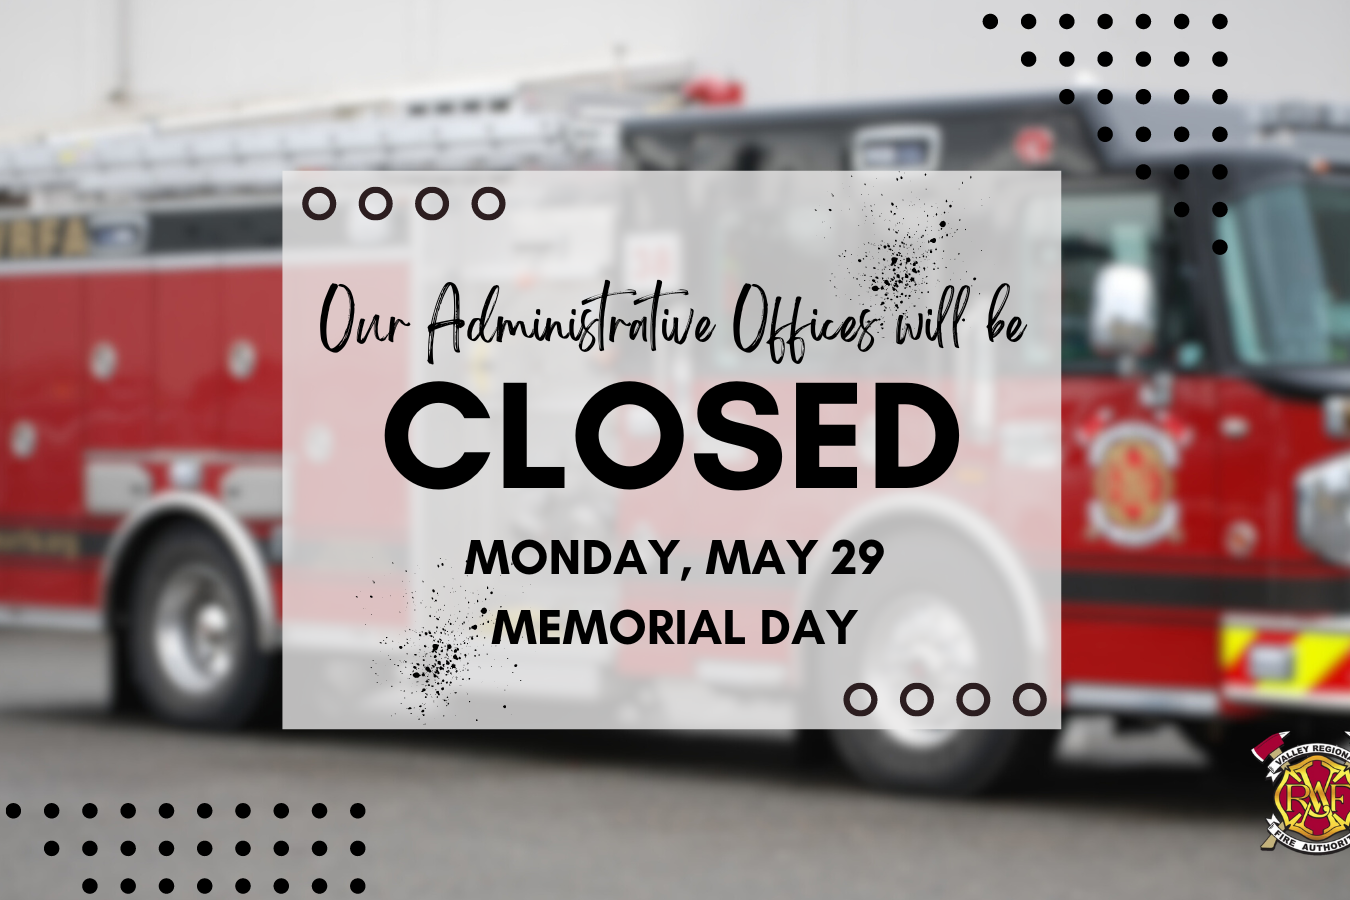 Valley Regional Fire Authority administrative offices will be closed monday, may 29 memorial day.